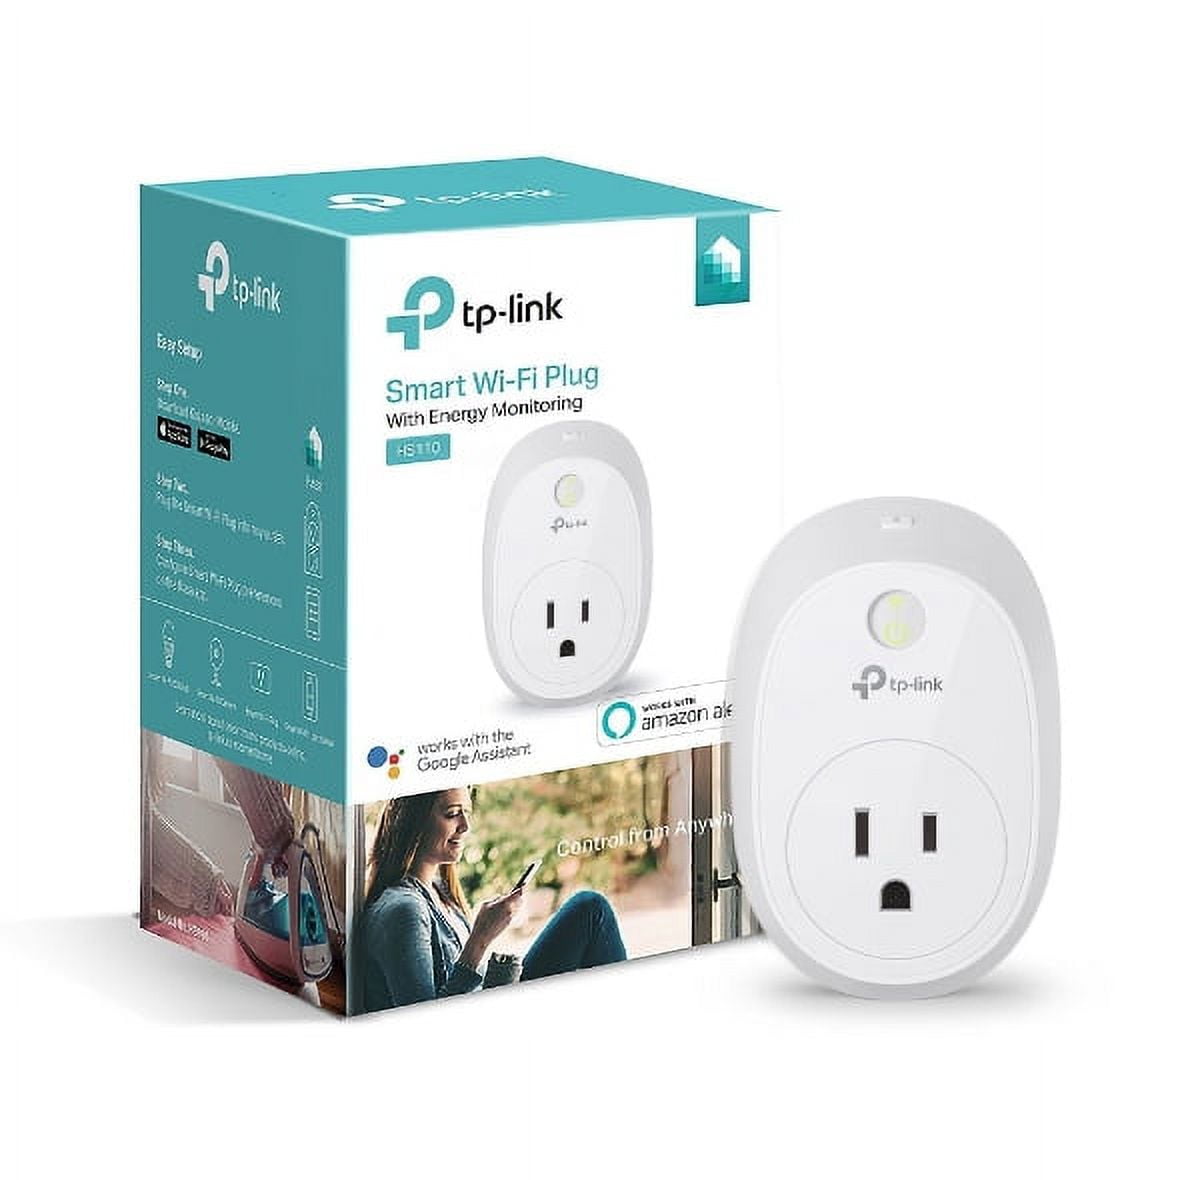 Viewise SH-WPM11 Wi-Fi Mini Smart Plug Works with Alexa for Voice Control  Save Energy and Reduce Electric Bill